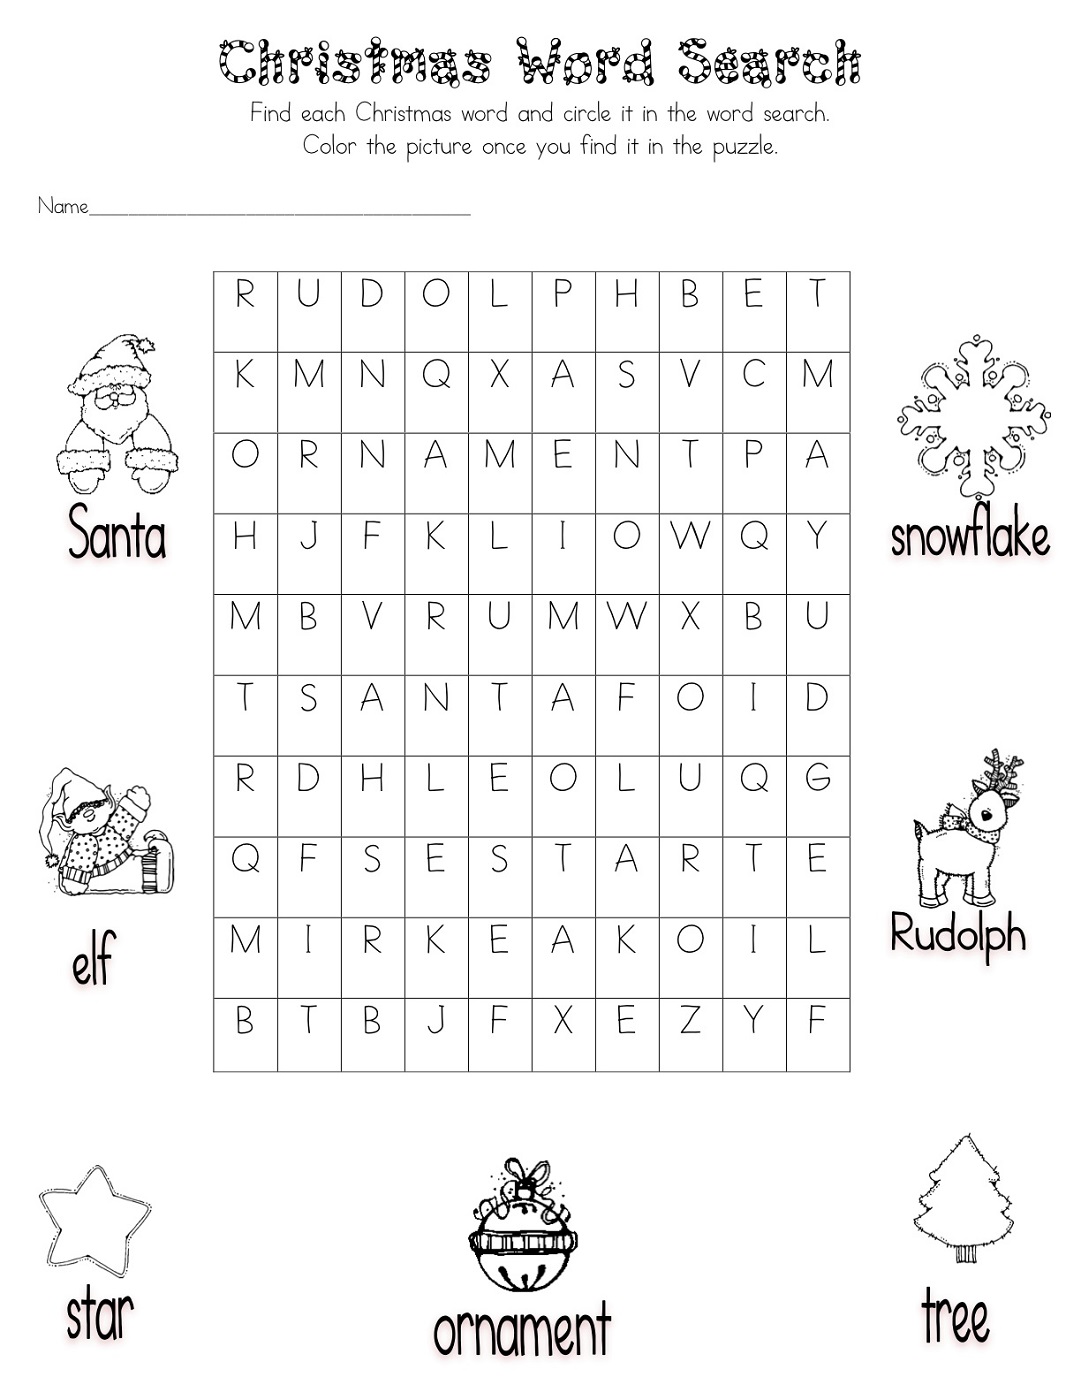 easy word searches for kids christmas